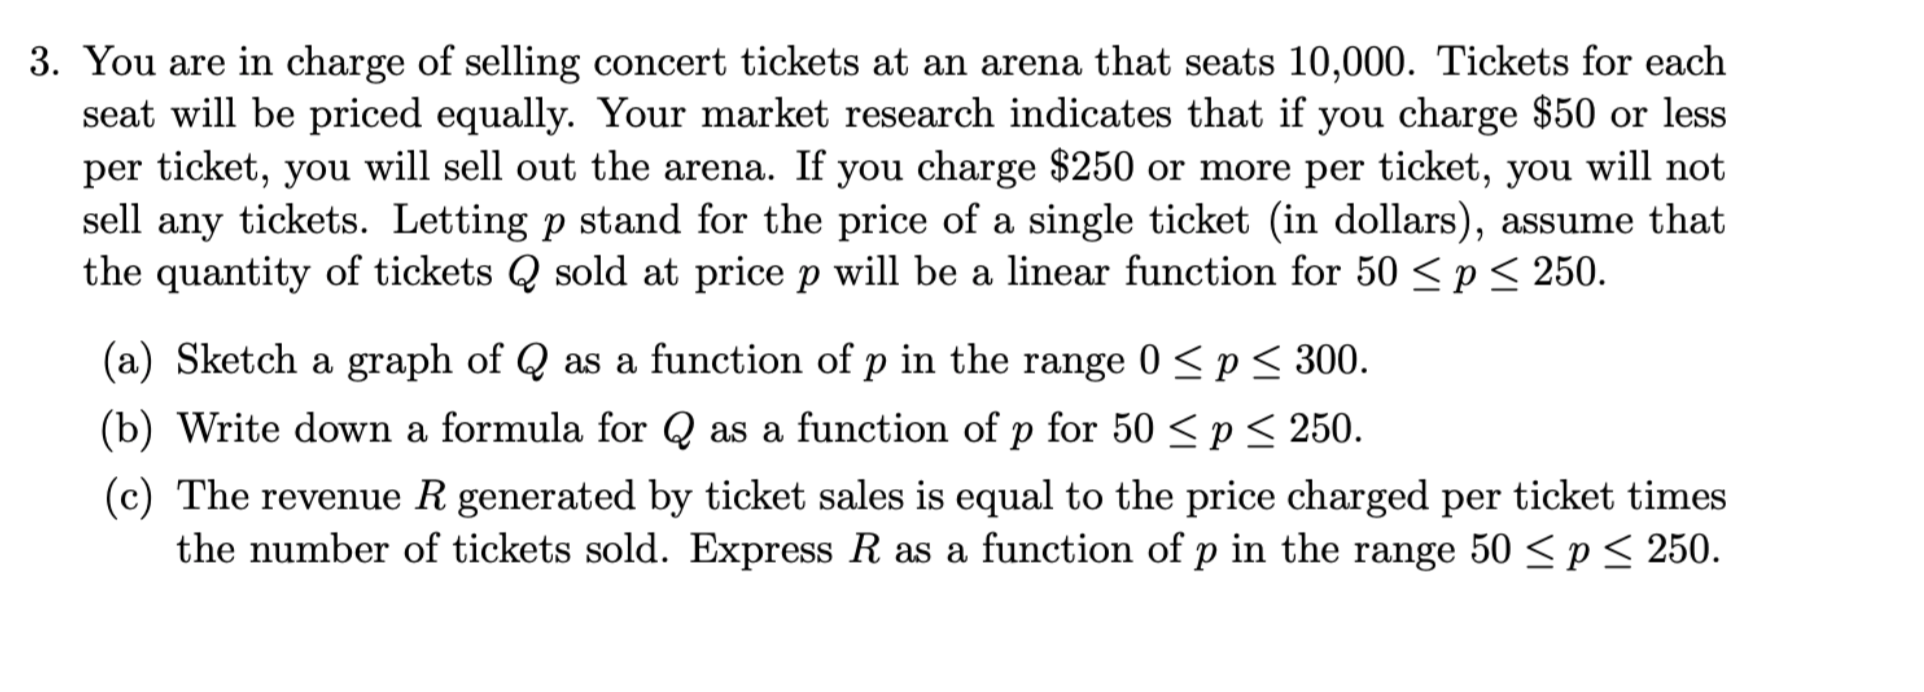 3. You are in charge of selling concert tickets at an arena that seats 10,000. Tickets for each
seat will be priced equally. Your market research indicates that if you charge $50 or less
per ticket, you will sell out the arena. If you charge $250 or more per ticket, you will not
sell any tickets. Letting p stand for the price of a single ticket (in dollars), assume that
the quantity of tickets Q sold at price p will be a linear function for 50 <p< 250.
(a) Sketch a graph of Q as a function of p in the range 0 <p< 300.
(b) Write down a formula for Q as a function of p for 50 <p< 250.
(c) The reveue R generated by ticket sales is equal to the price charged per ticket times
the number of tickets sold. Express R as a function of p in the range 50 < p < 250.
